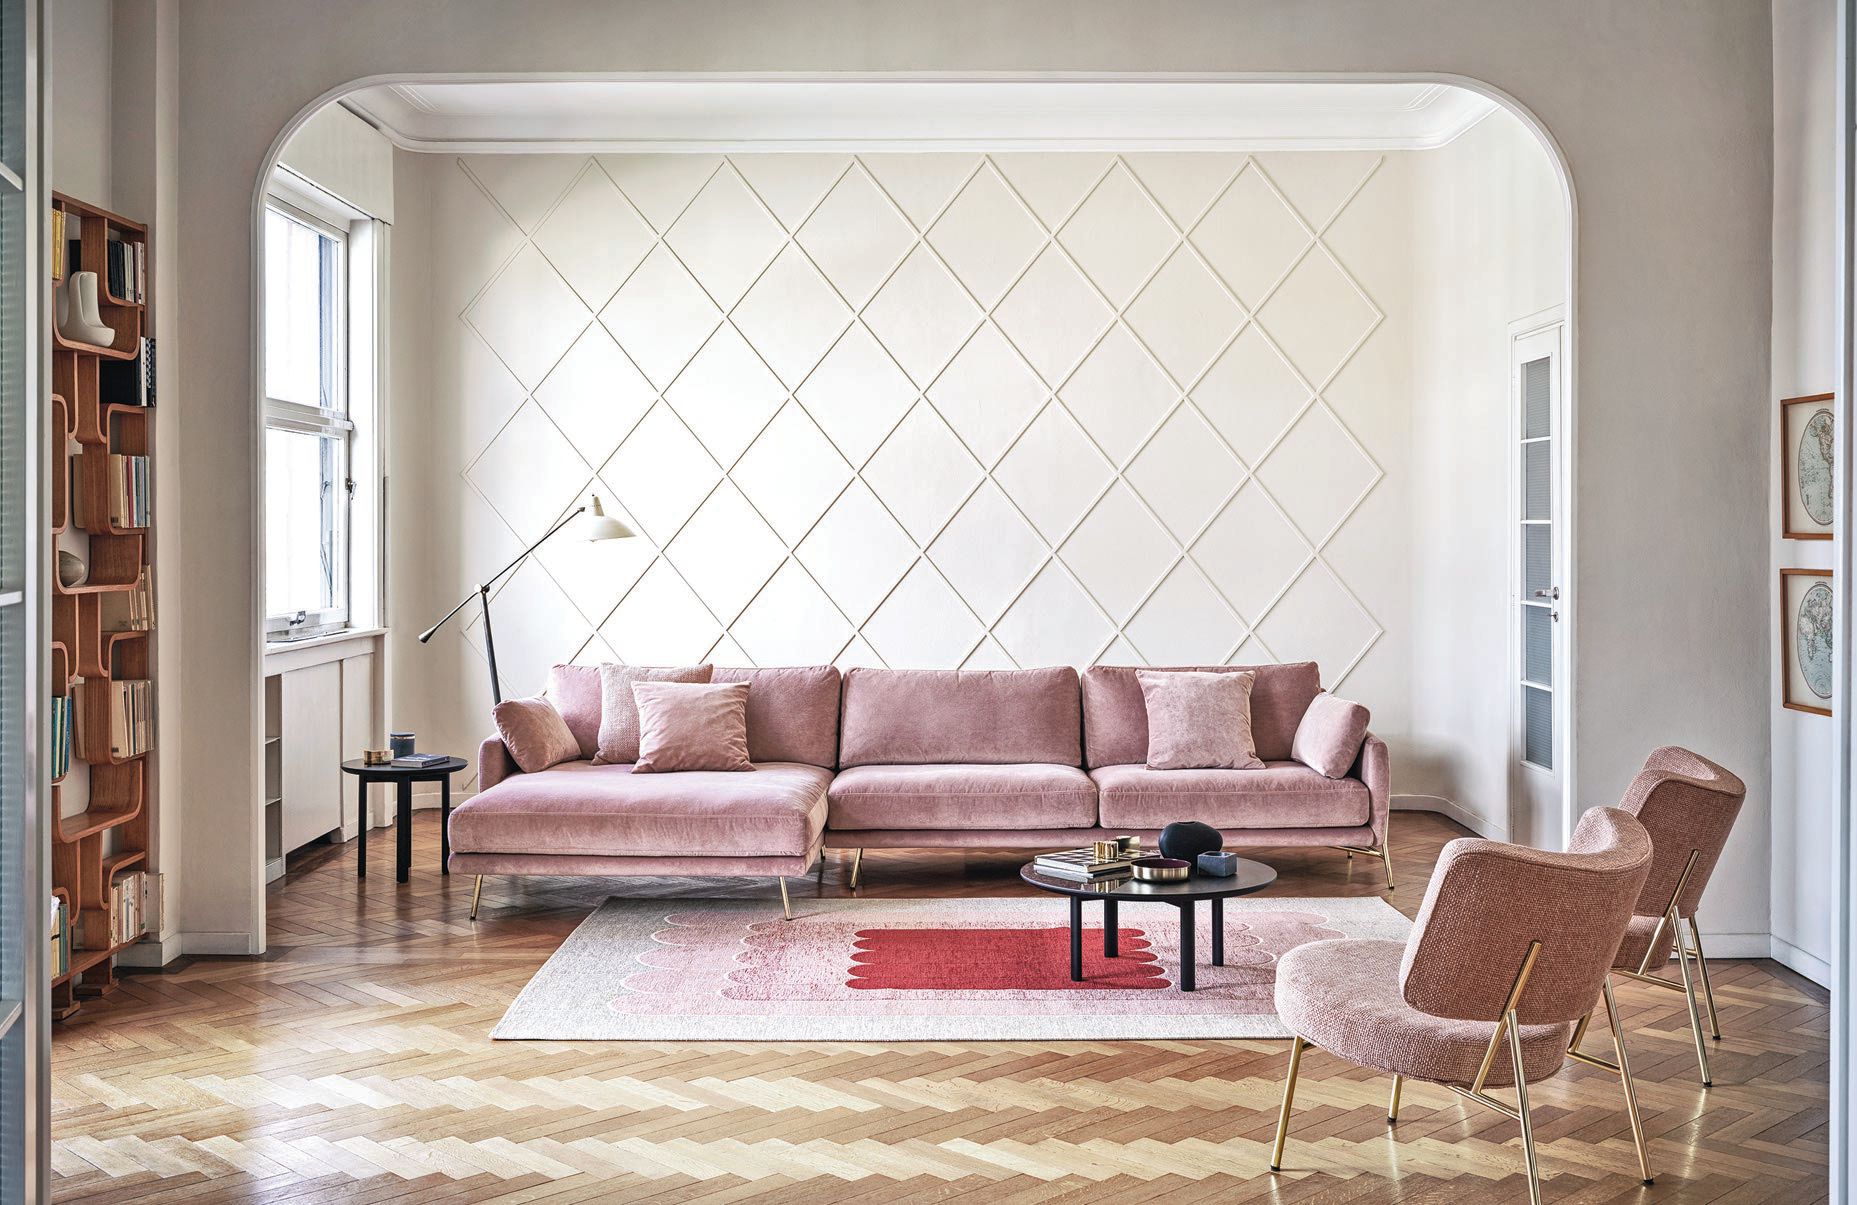 Furnishings from Calligaris include a rose-colored Le Marais sofa and Coco chair PHOTO COURTESY OF BRAND